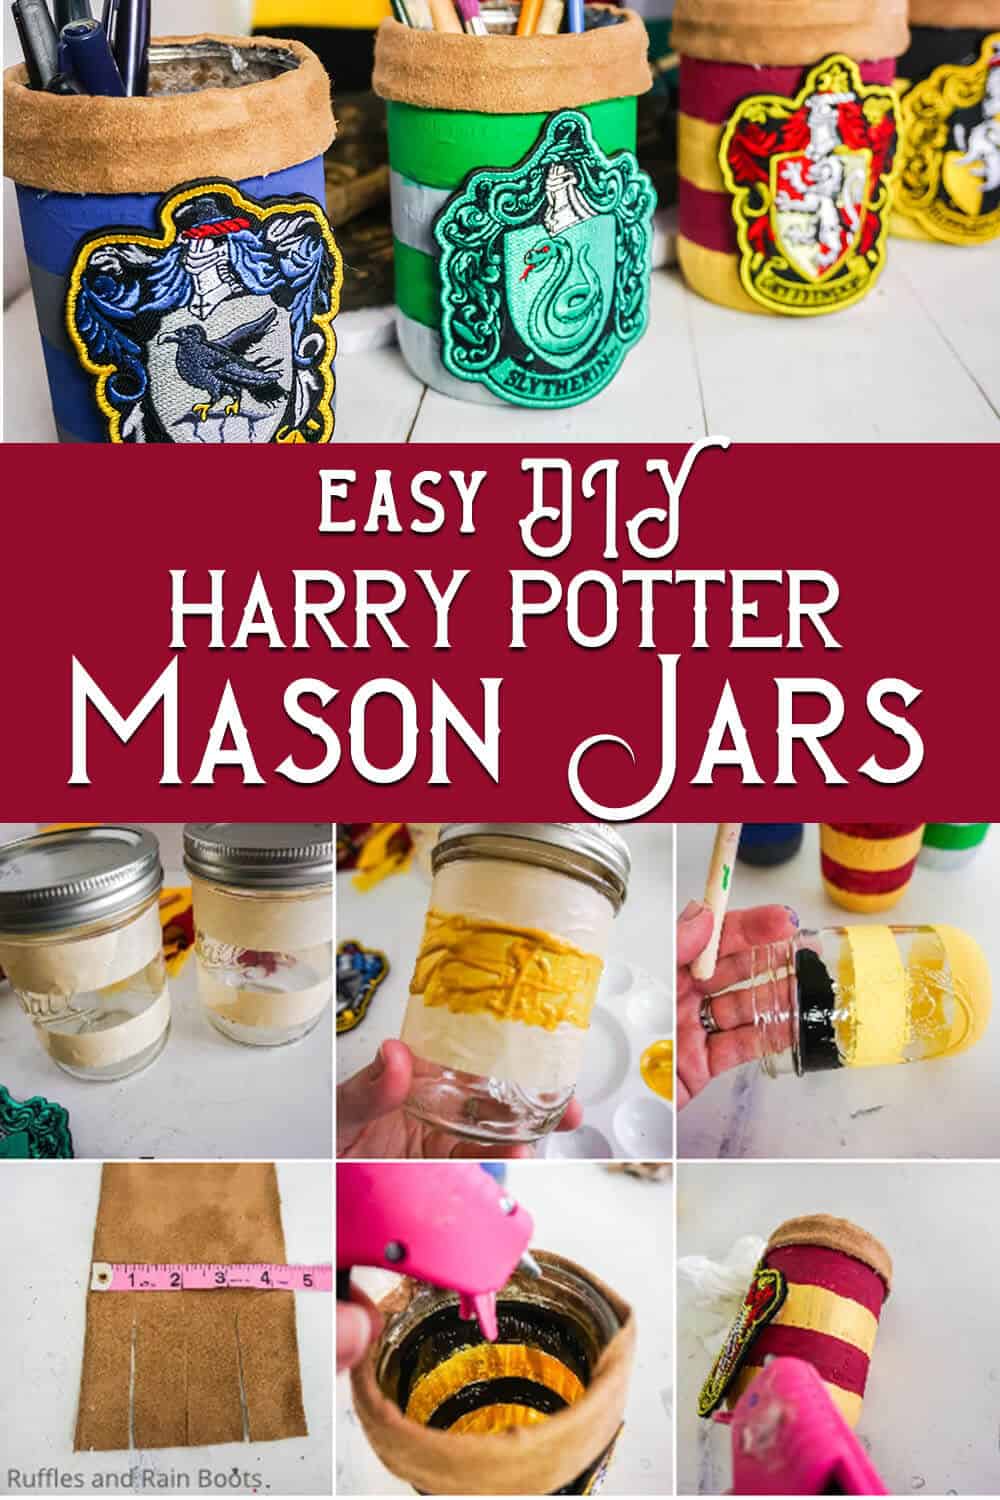 photo collage of easy hogwarts house colors jars with text which reads easy diy harry potter mason jars